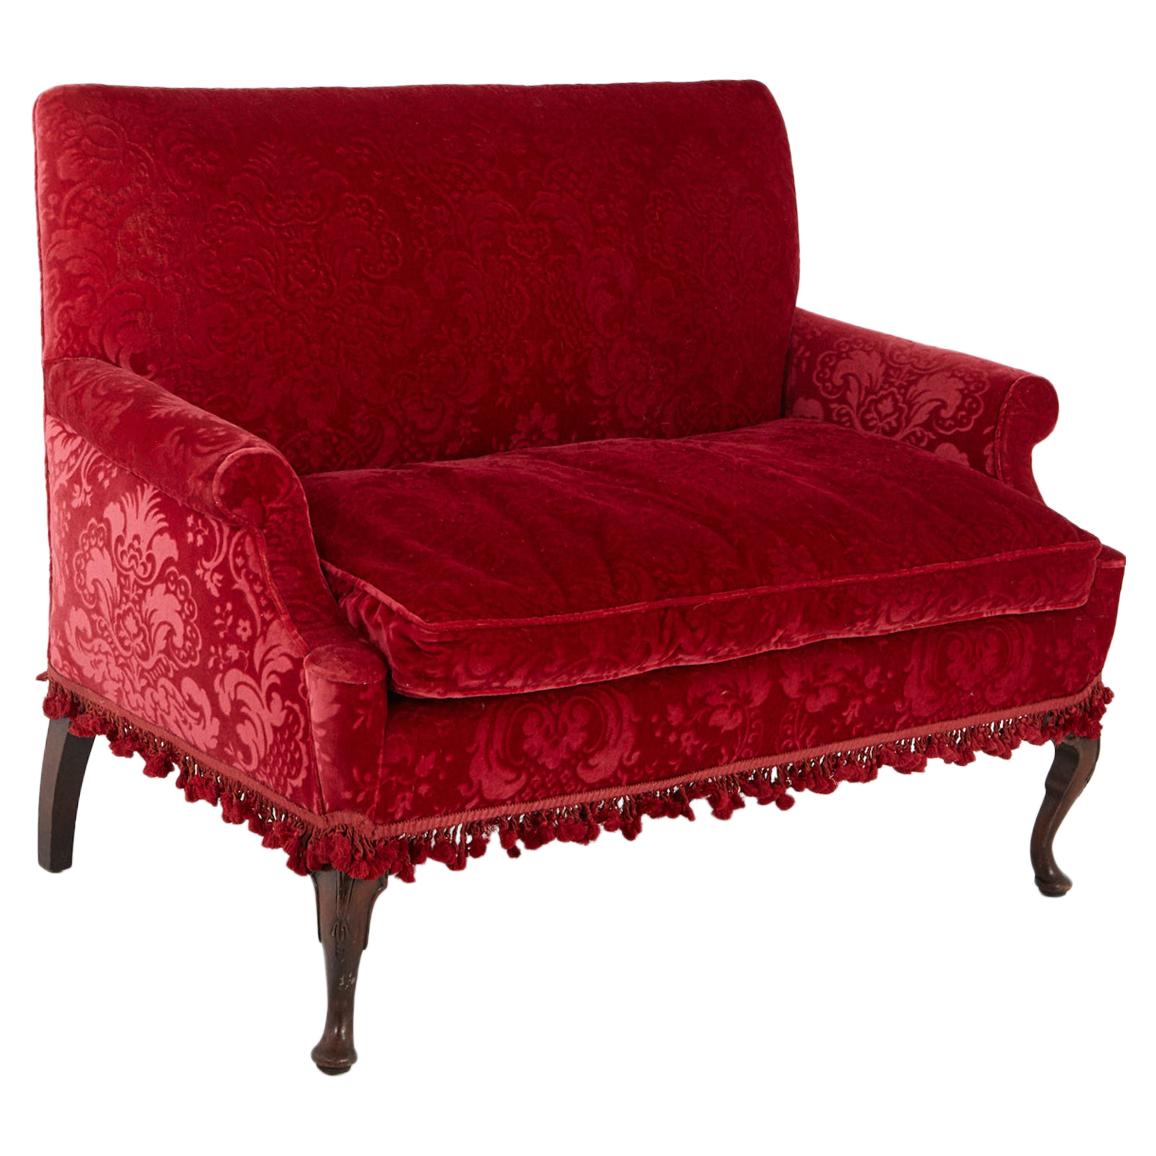 Victorian Sofa in Red Embossed Acanthus Ornament Mohair Upholstery No 2 of 2